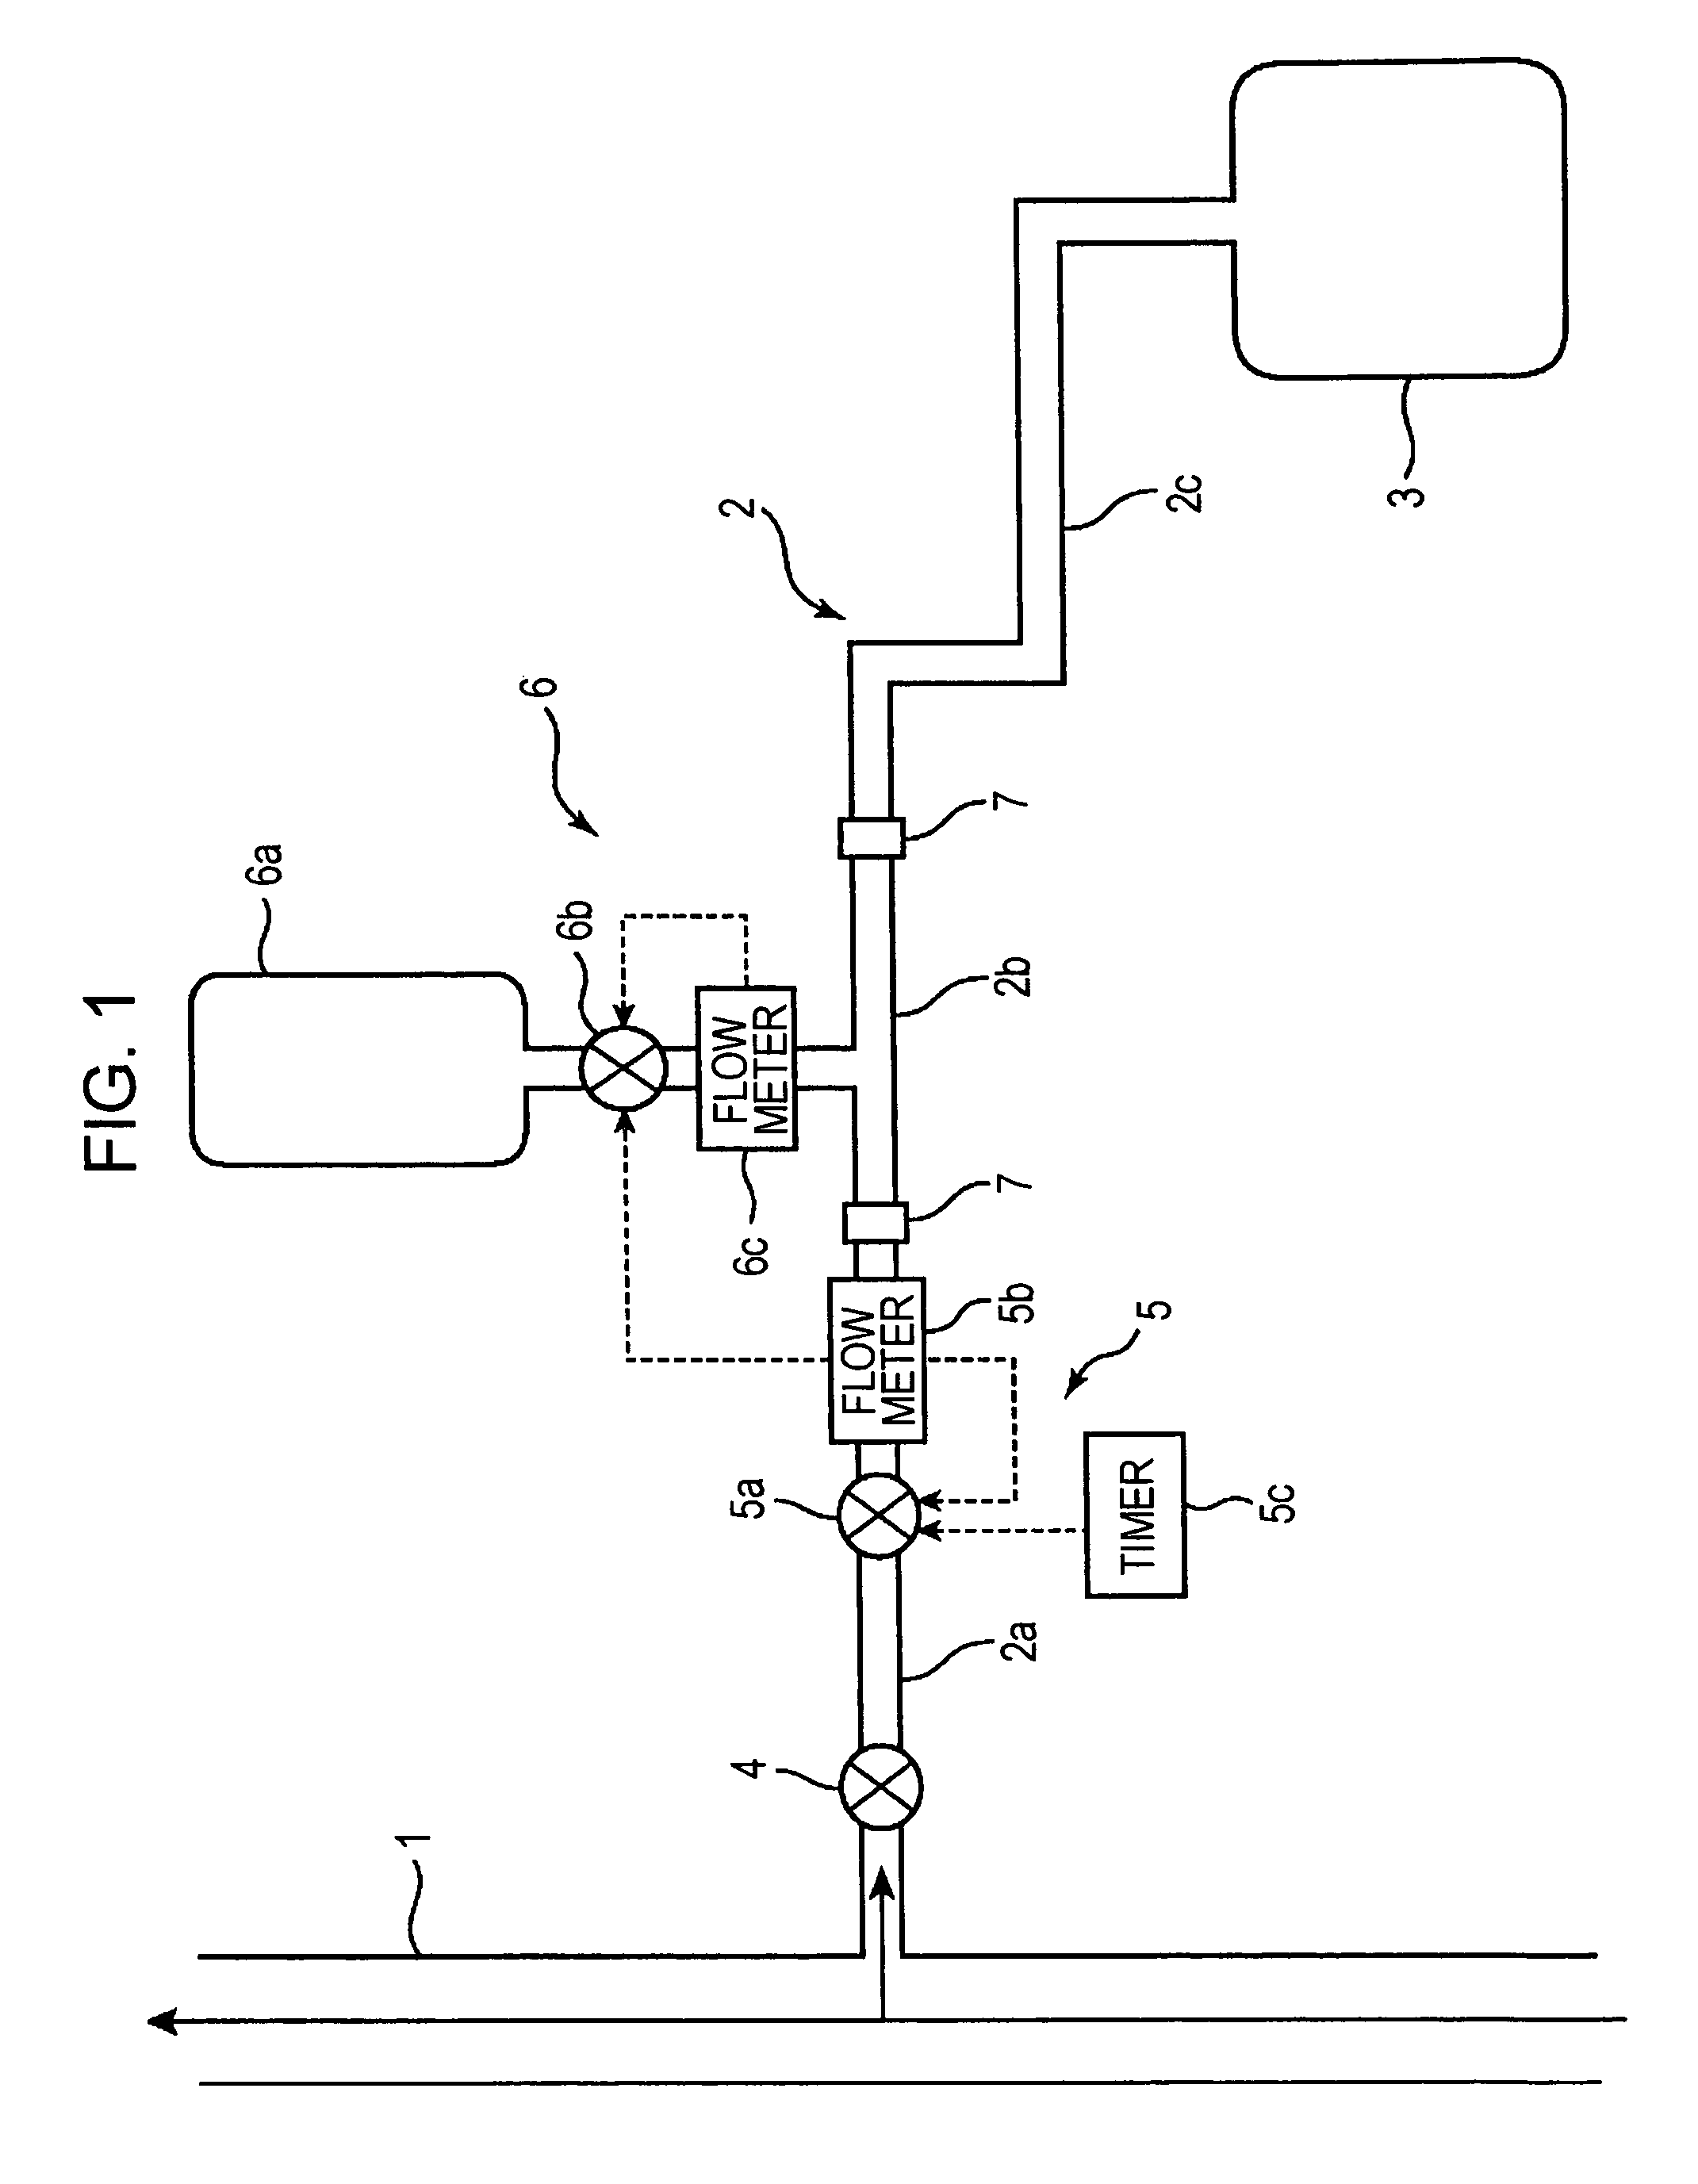 Analyzer for absorption spectrometry of impurity concentration contained in liquid using exciting light